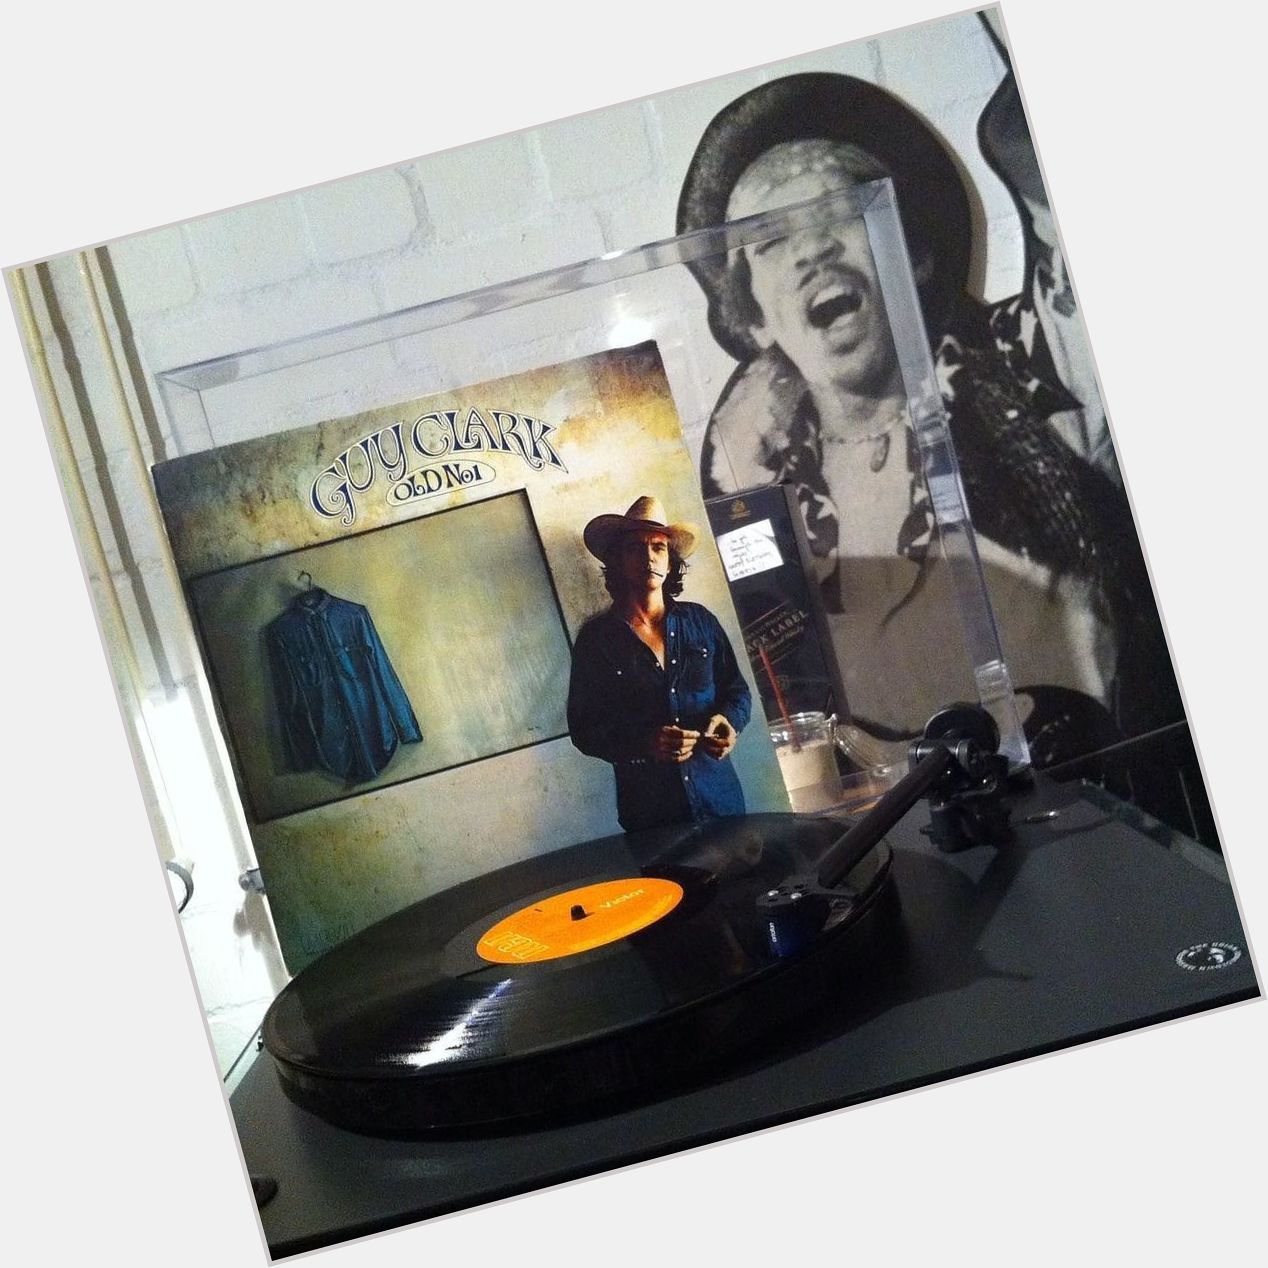  :  | Happy birthday to GUY CLARK, whose debut OLD NO. 1 (RCA 1975) is 